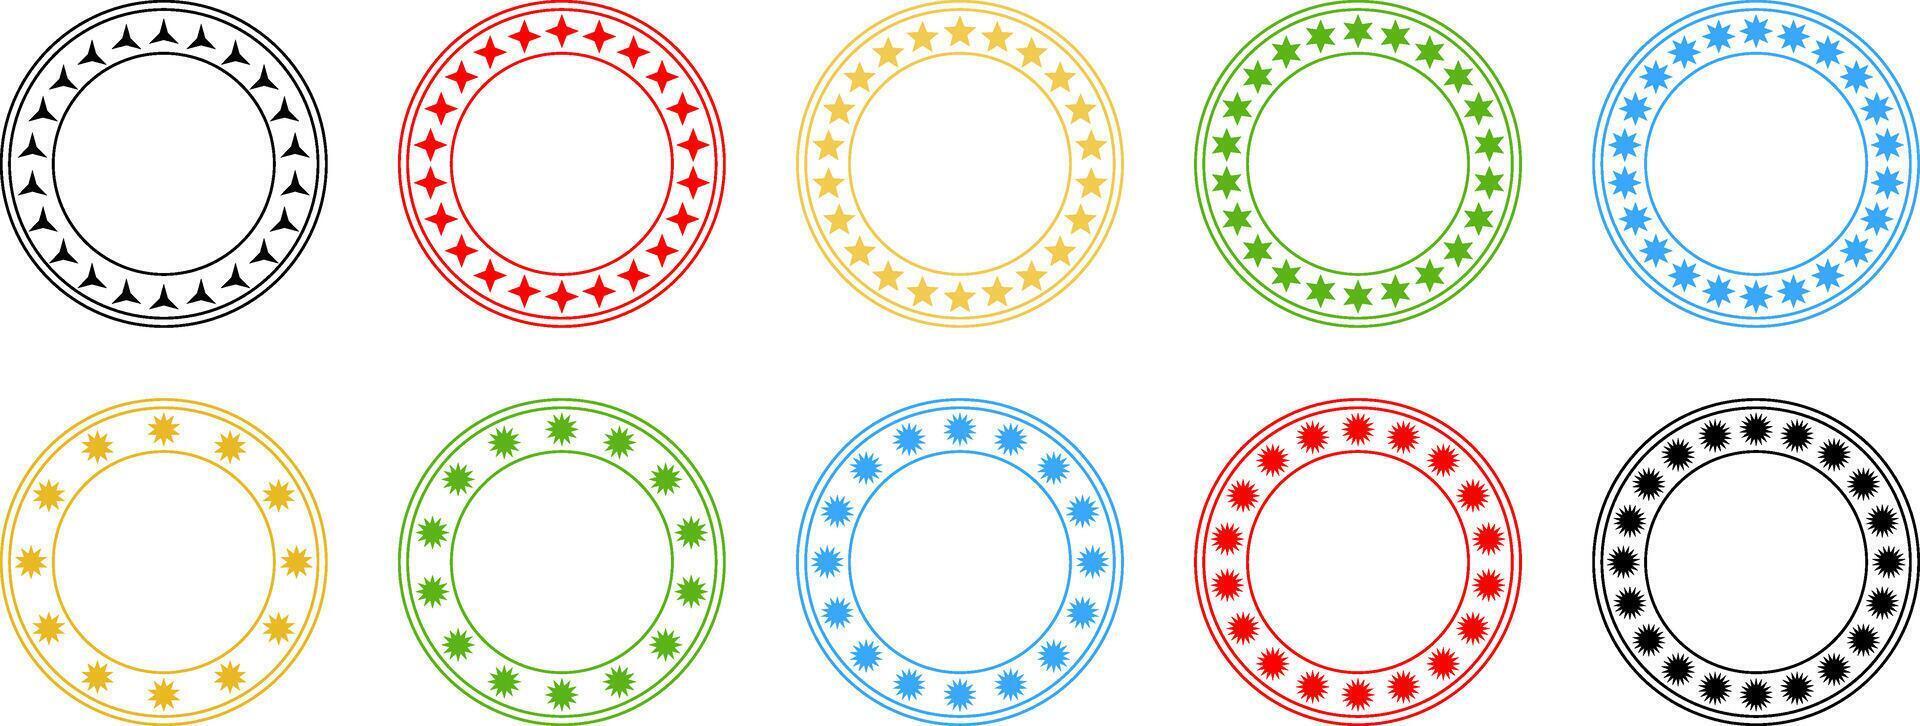 star circle frame icon set. vector label, sticker, stamp. simple and isolated design